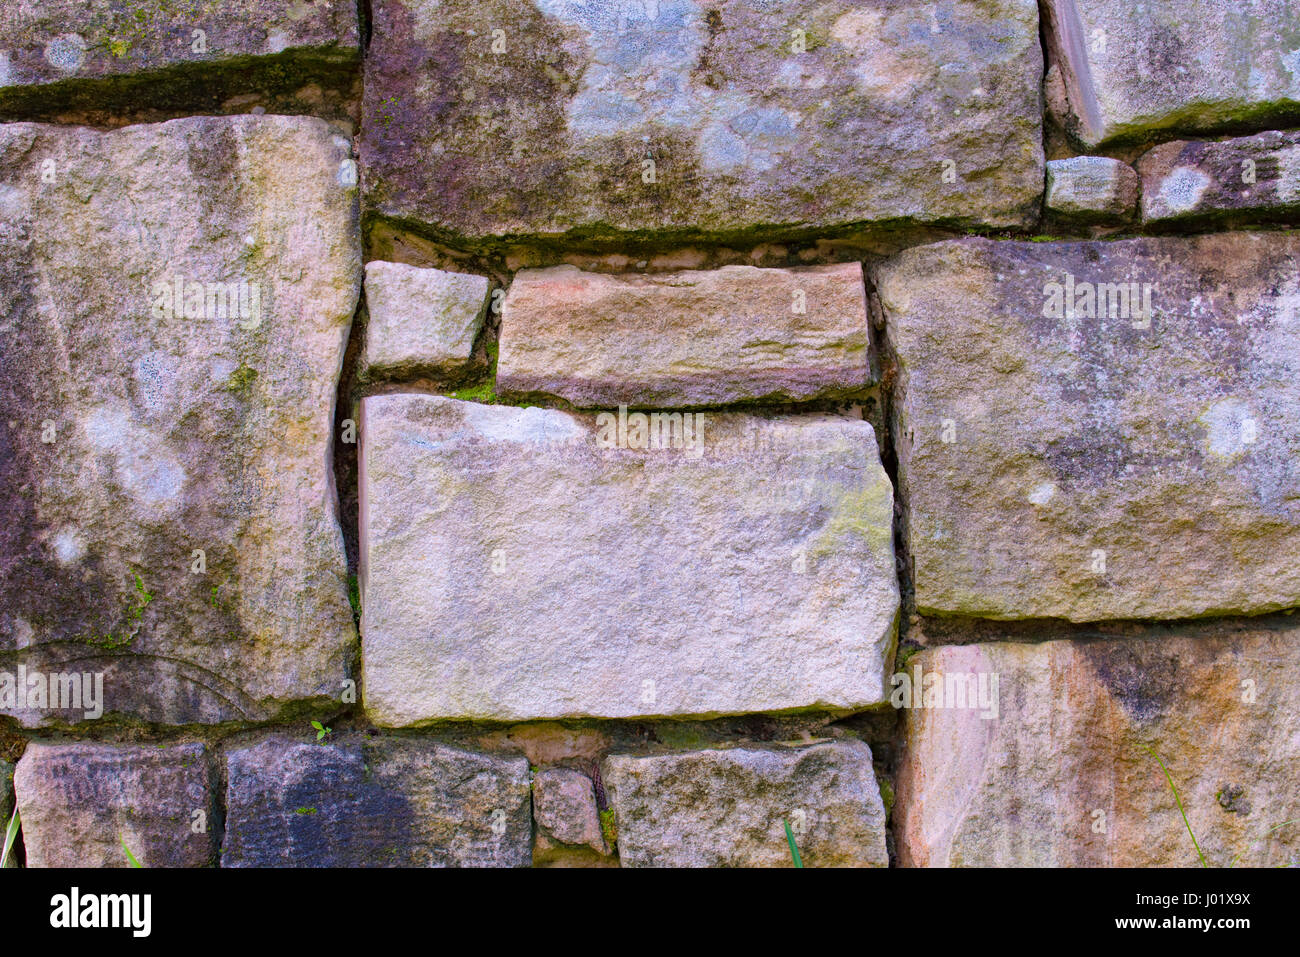 Natural Sydney sandstone cut into rectangular shapes in a retaining wall Stock Photo